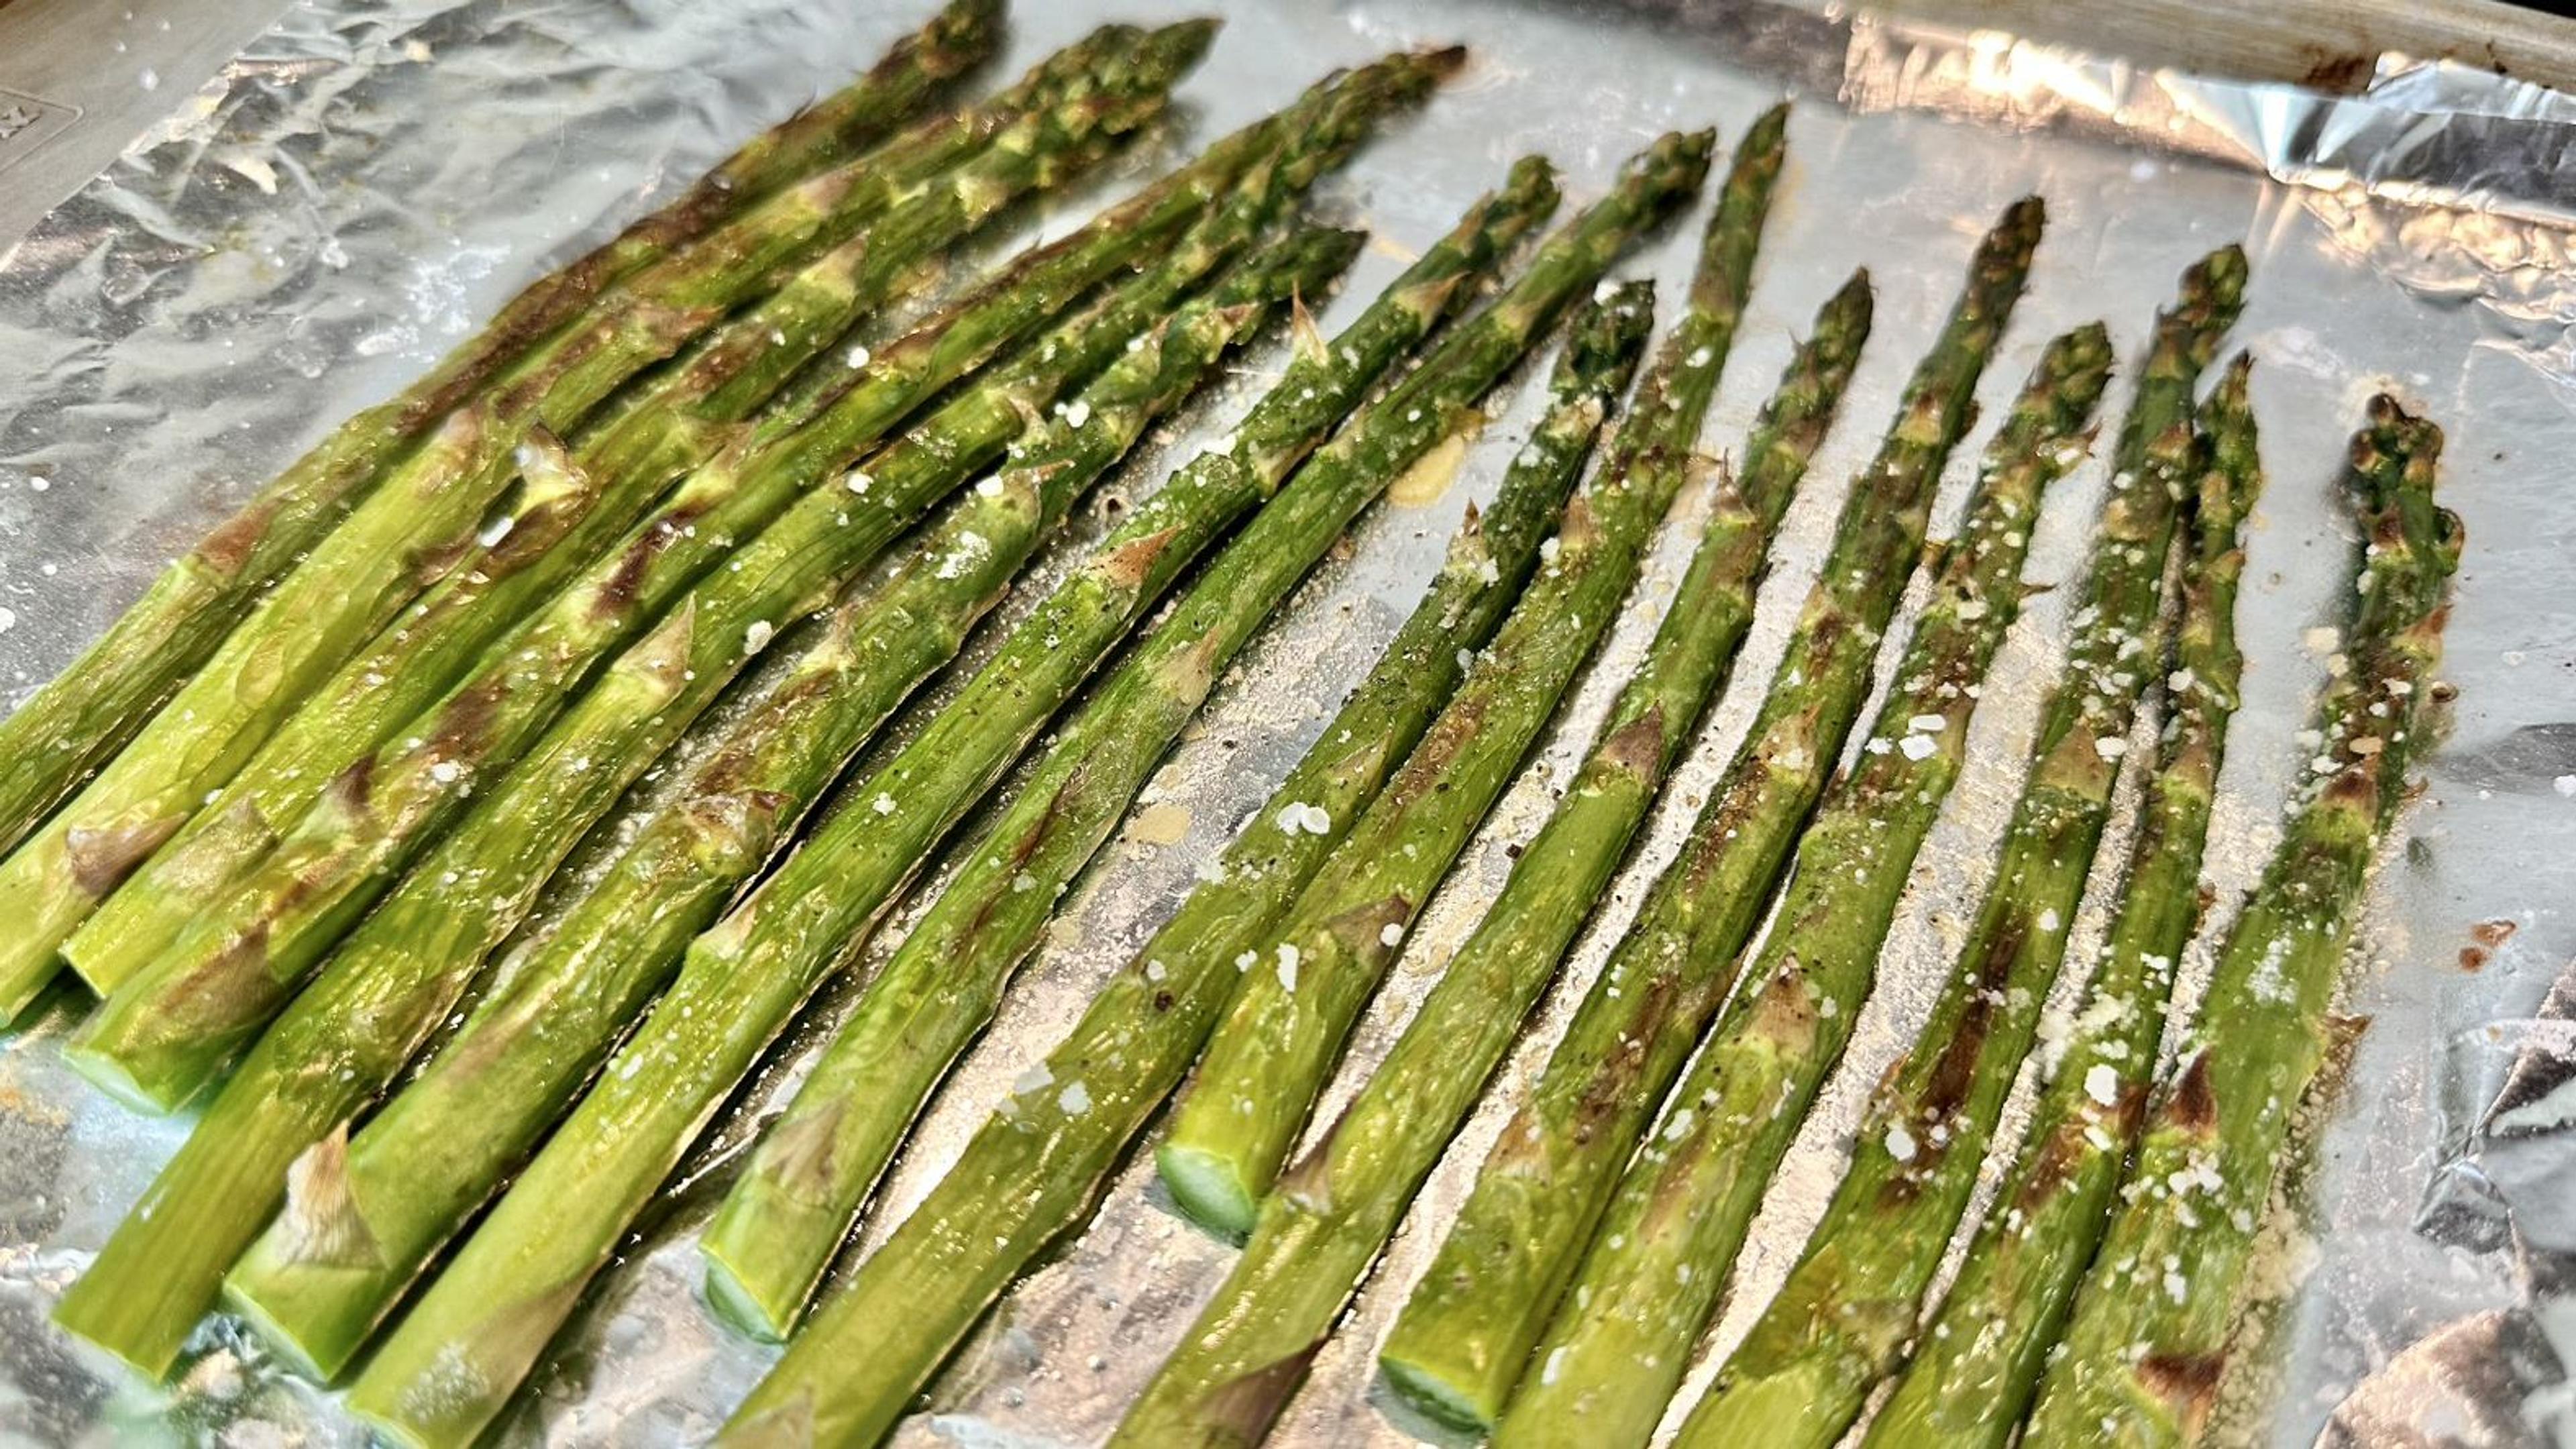 Turn the broiler on high. Toss Asparagus in olive oil, salt and pepper. Do not add lemon juice as it will taste best fresh after roasting. Place on the baking sheet. Roast under top broiler for 5-7 minutes depending on the thickness of the asparagus. Very thin asparagus will only need about 5 minutes. The asparagus should have a nice brown color on top with a few charred bits.